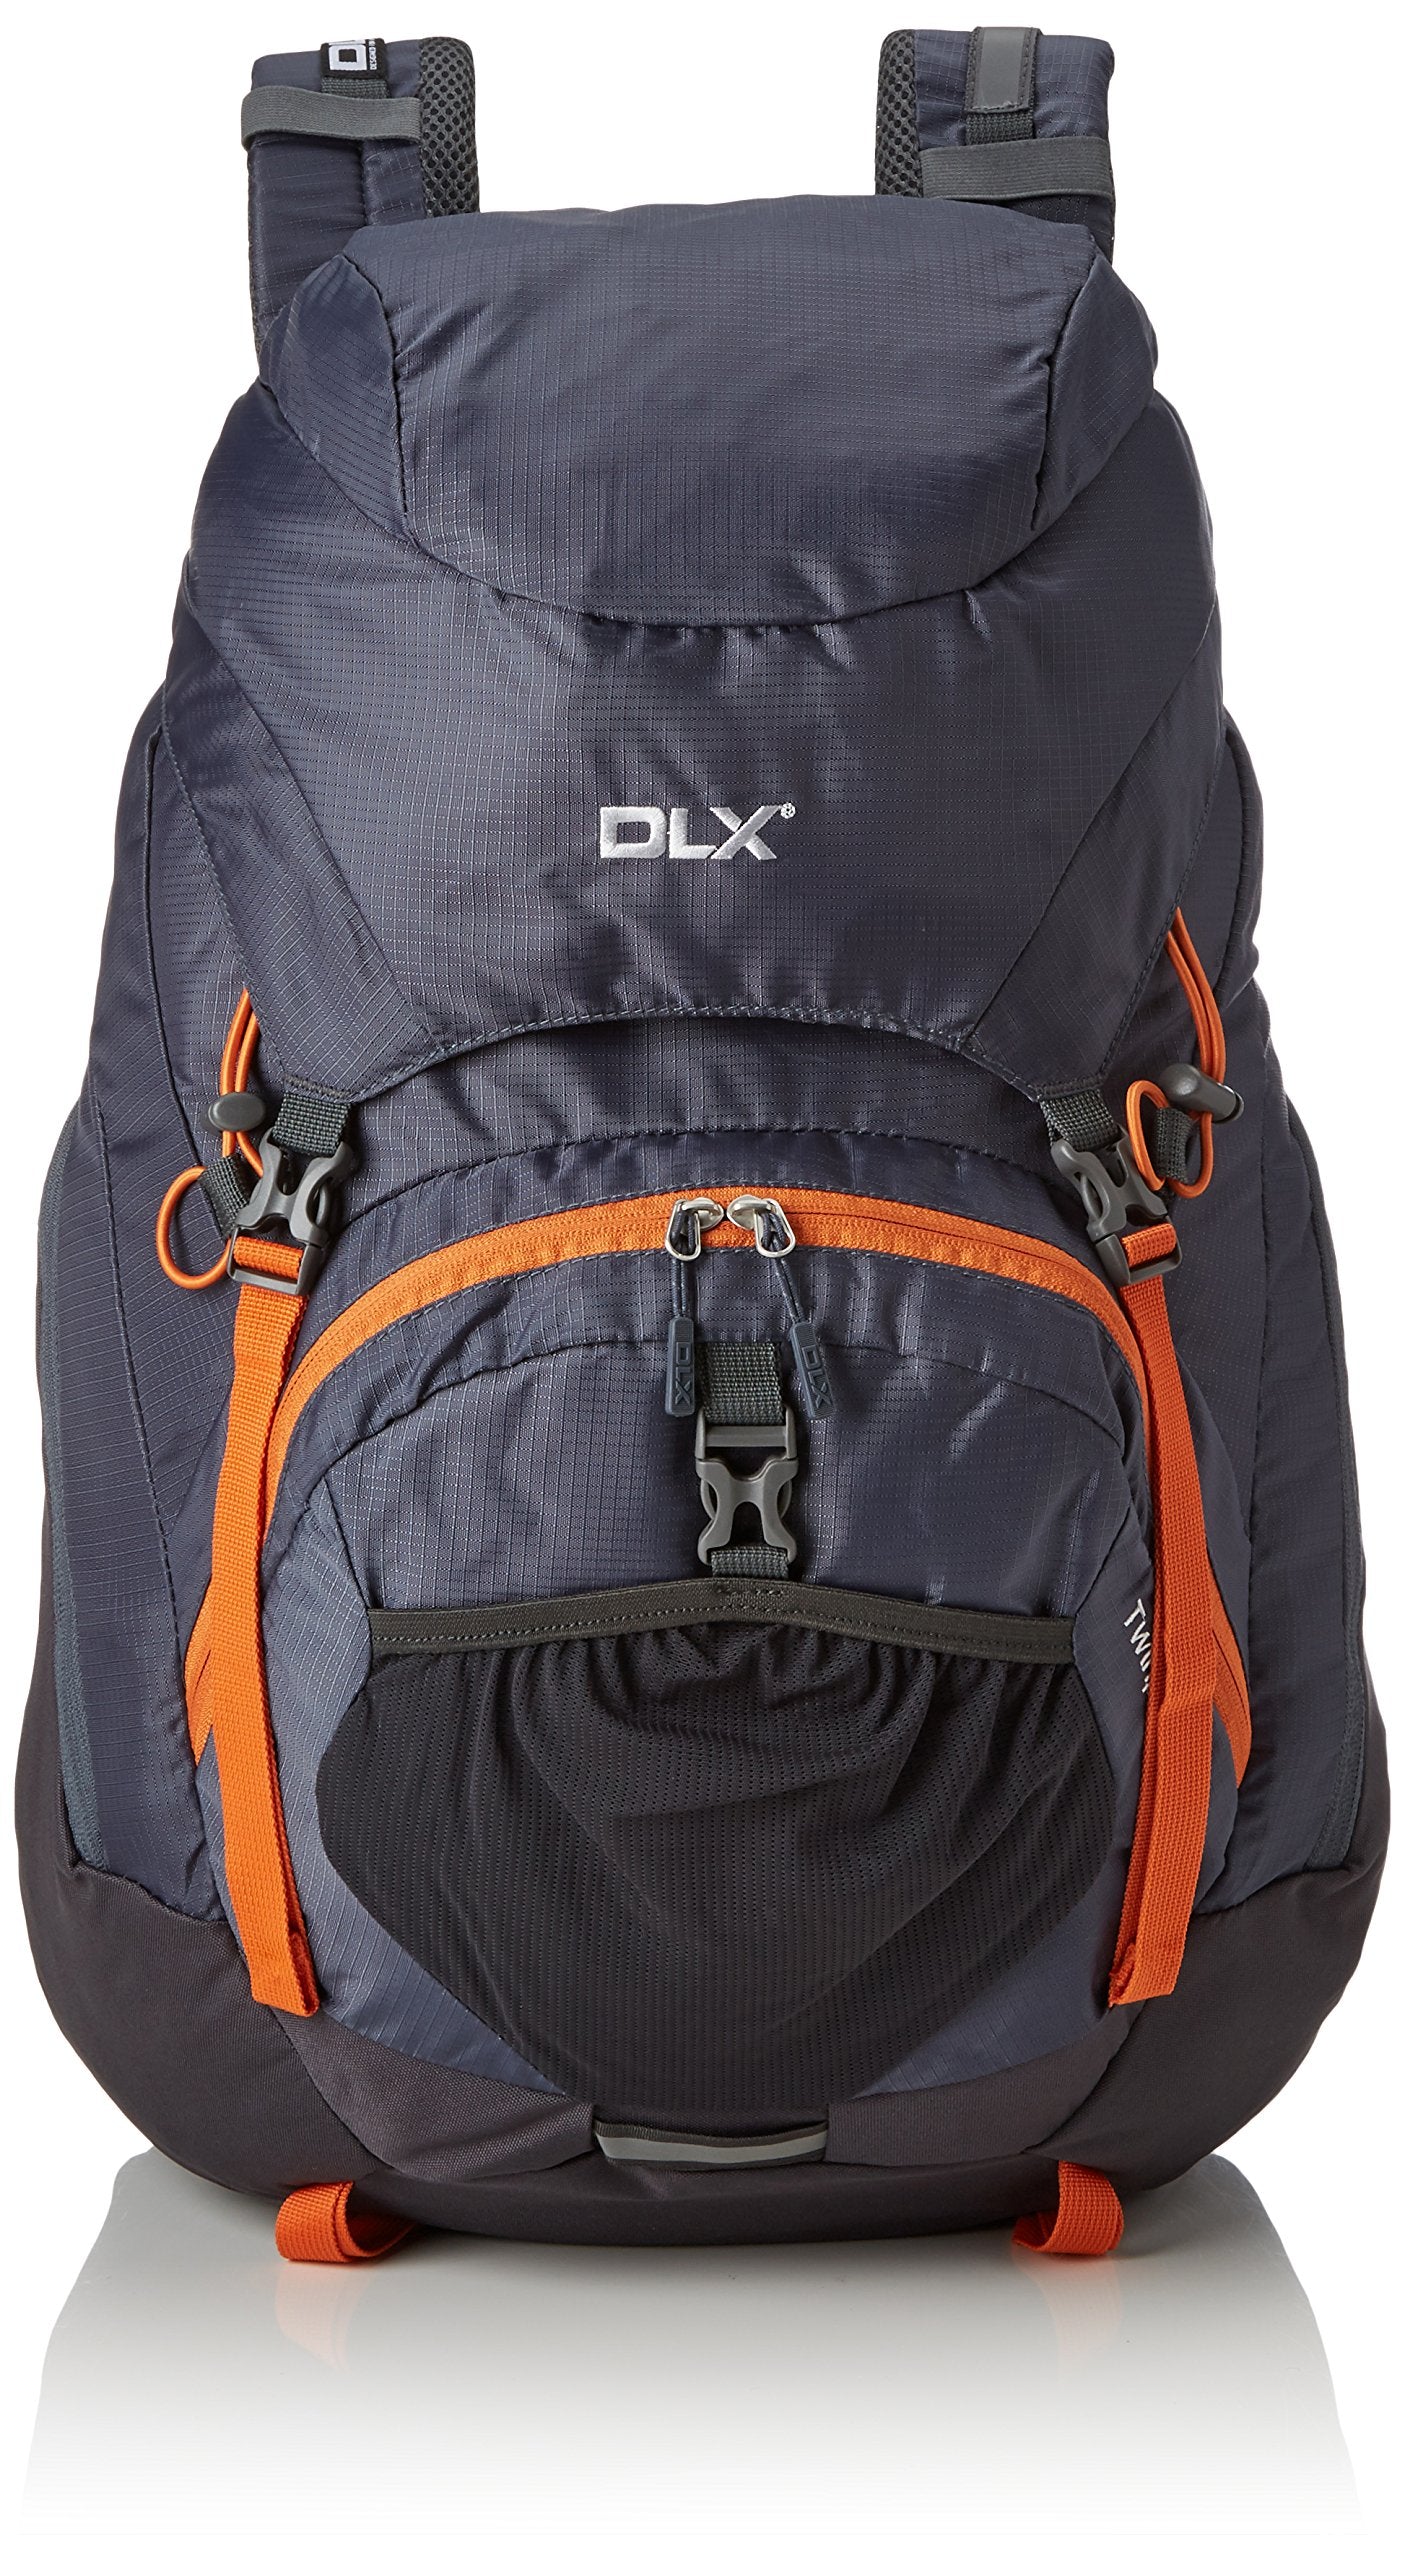 DLX Twinpeak, Flint, Backpack 45 Litres with Trekking Pole Loops, Hydration Compatible, Grey